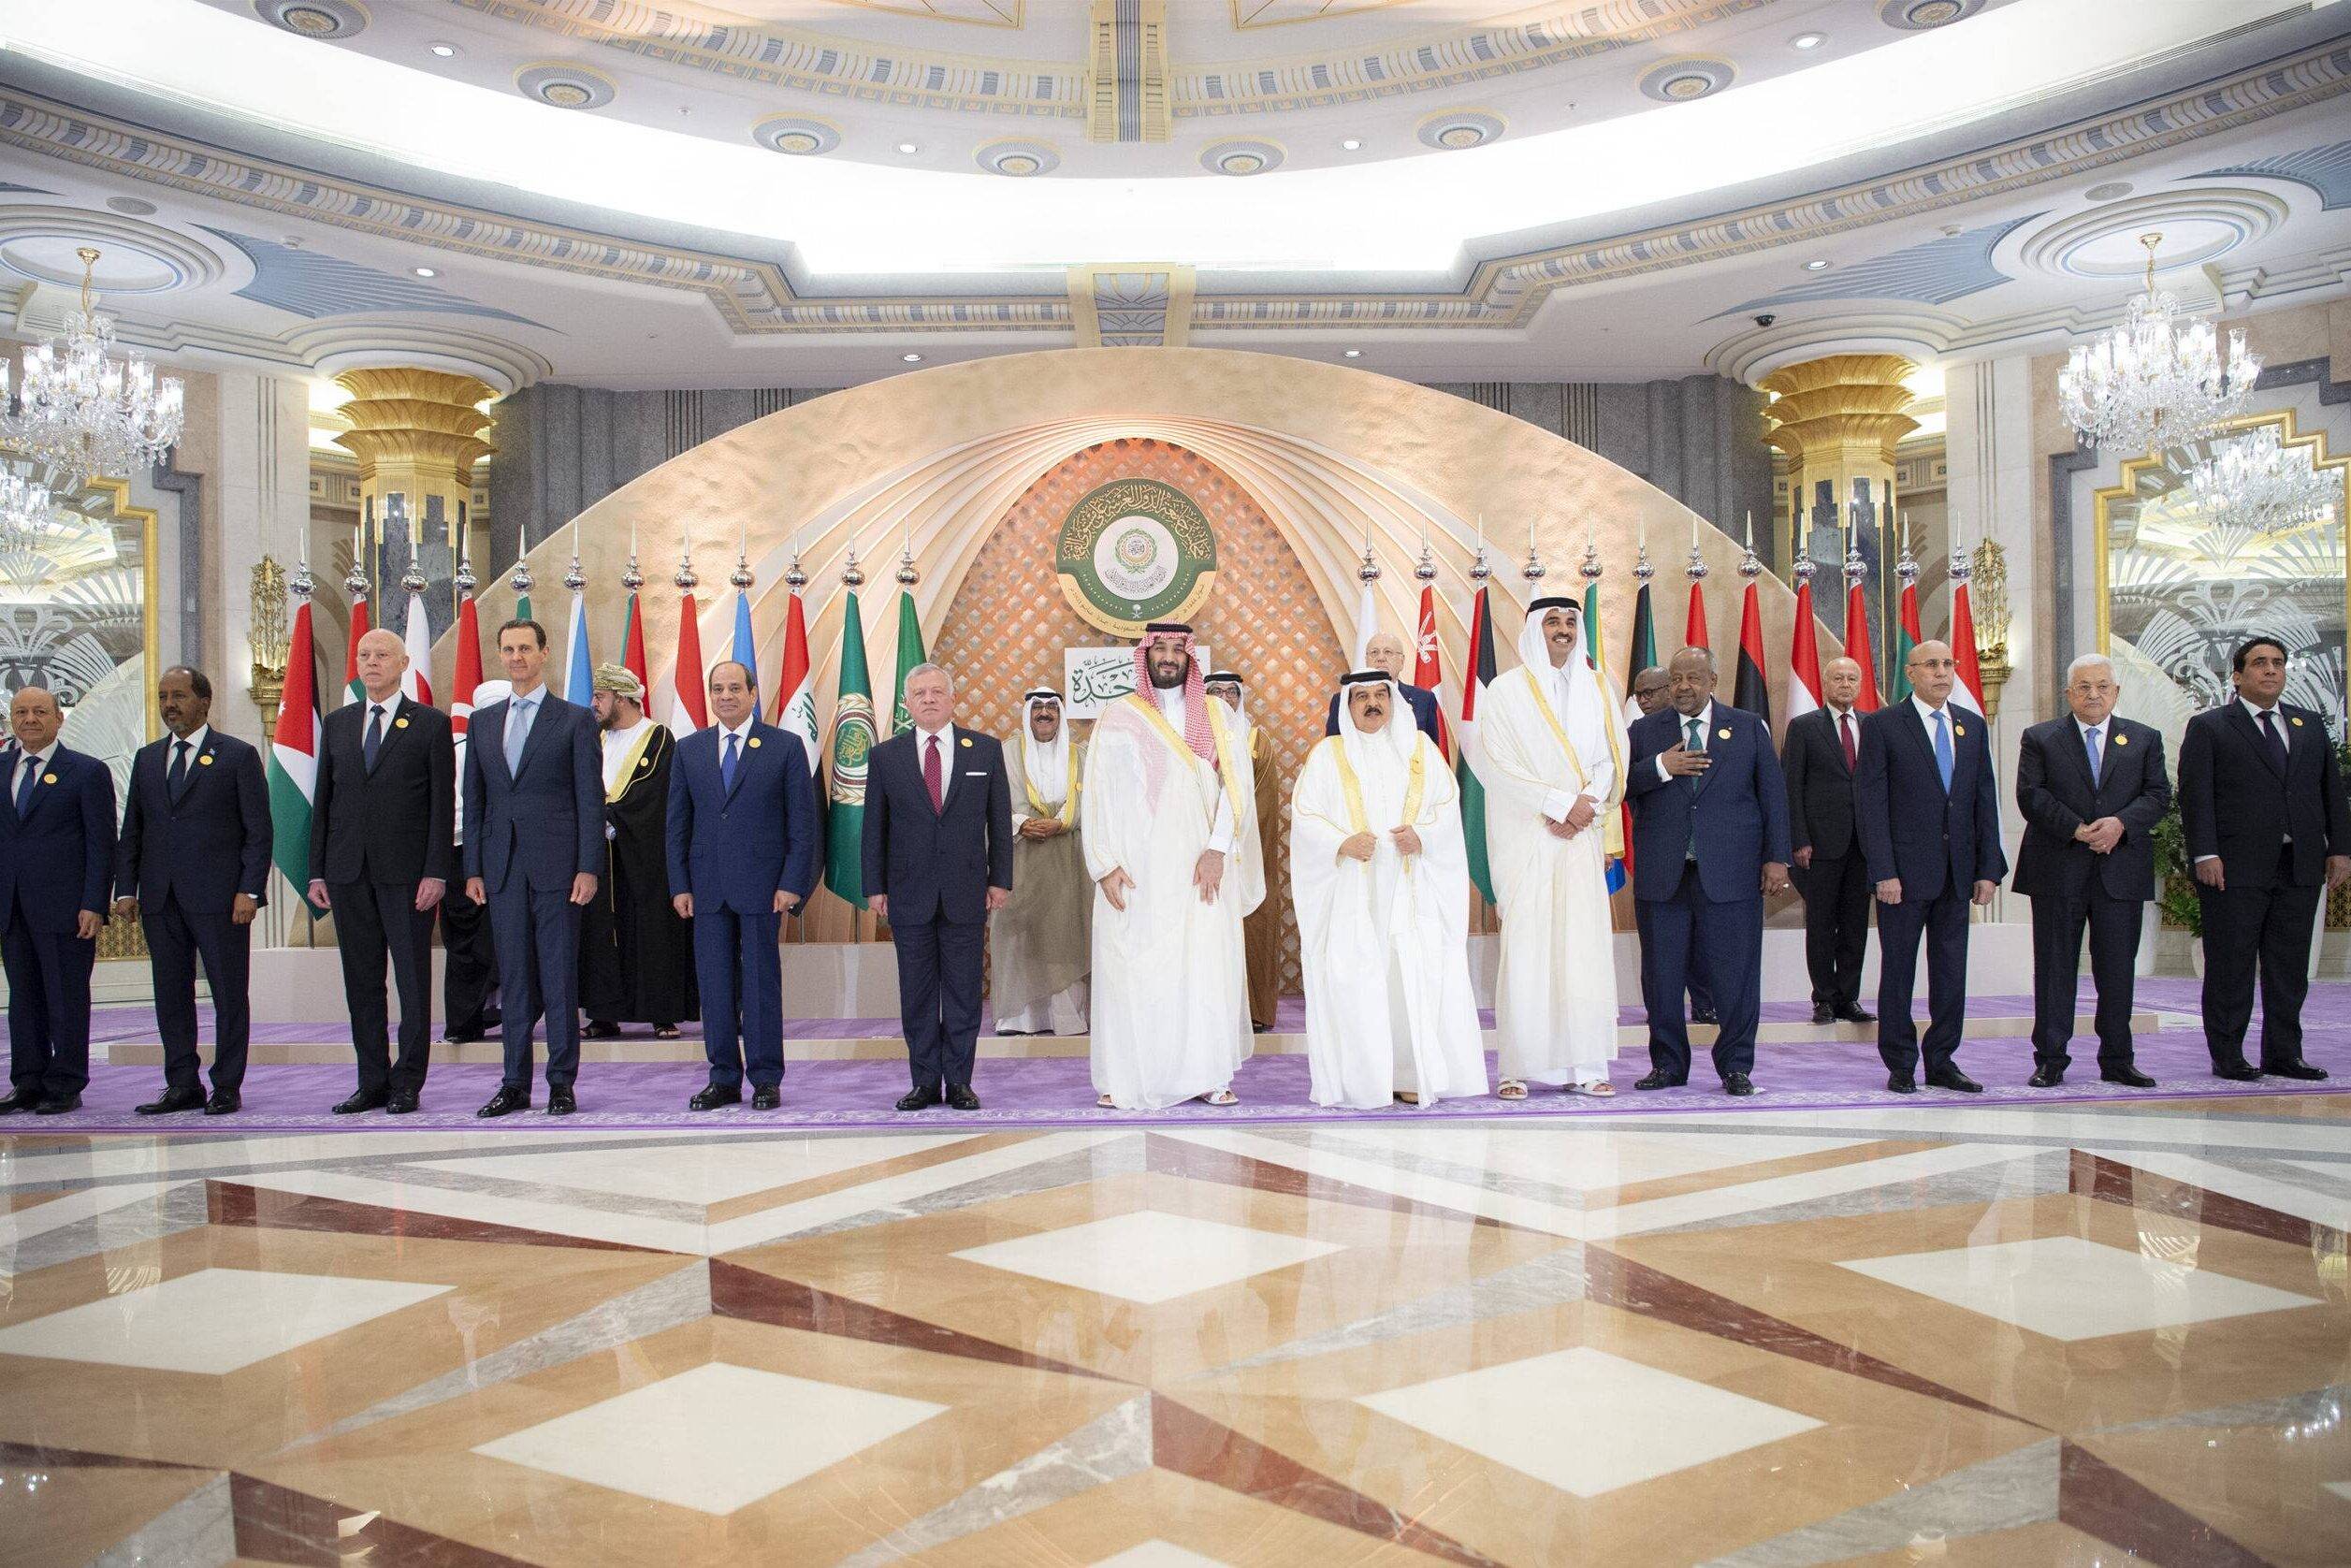 Leaders and officials pose for a family photo ahead of the 32nd Arab League Summit in Jeddah, Saudi Arabia on May 19, 2023 [Royal Court of Saudi Arabia - Anadolu Agency]